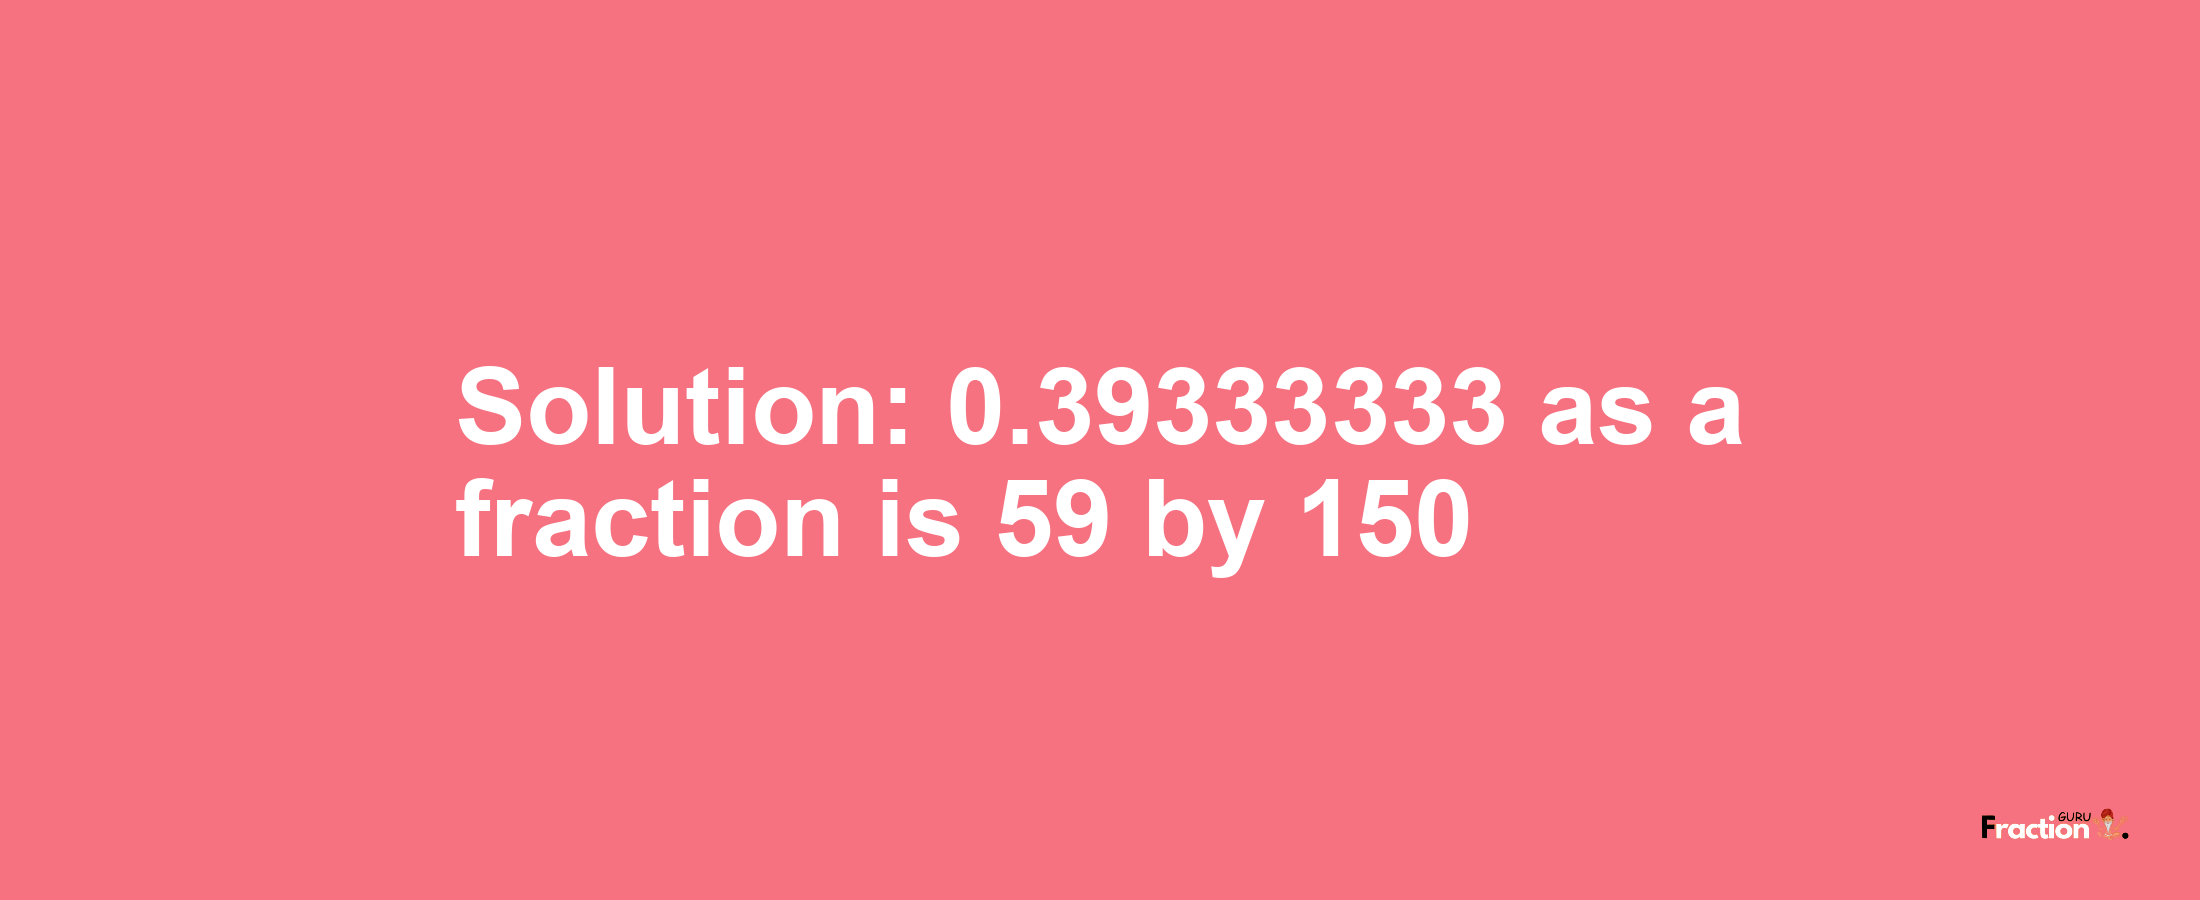 Solution:0.39333333 as a fraction is 59/150